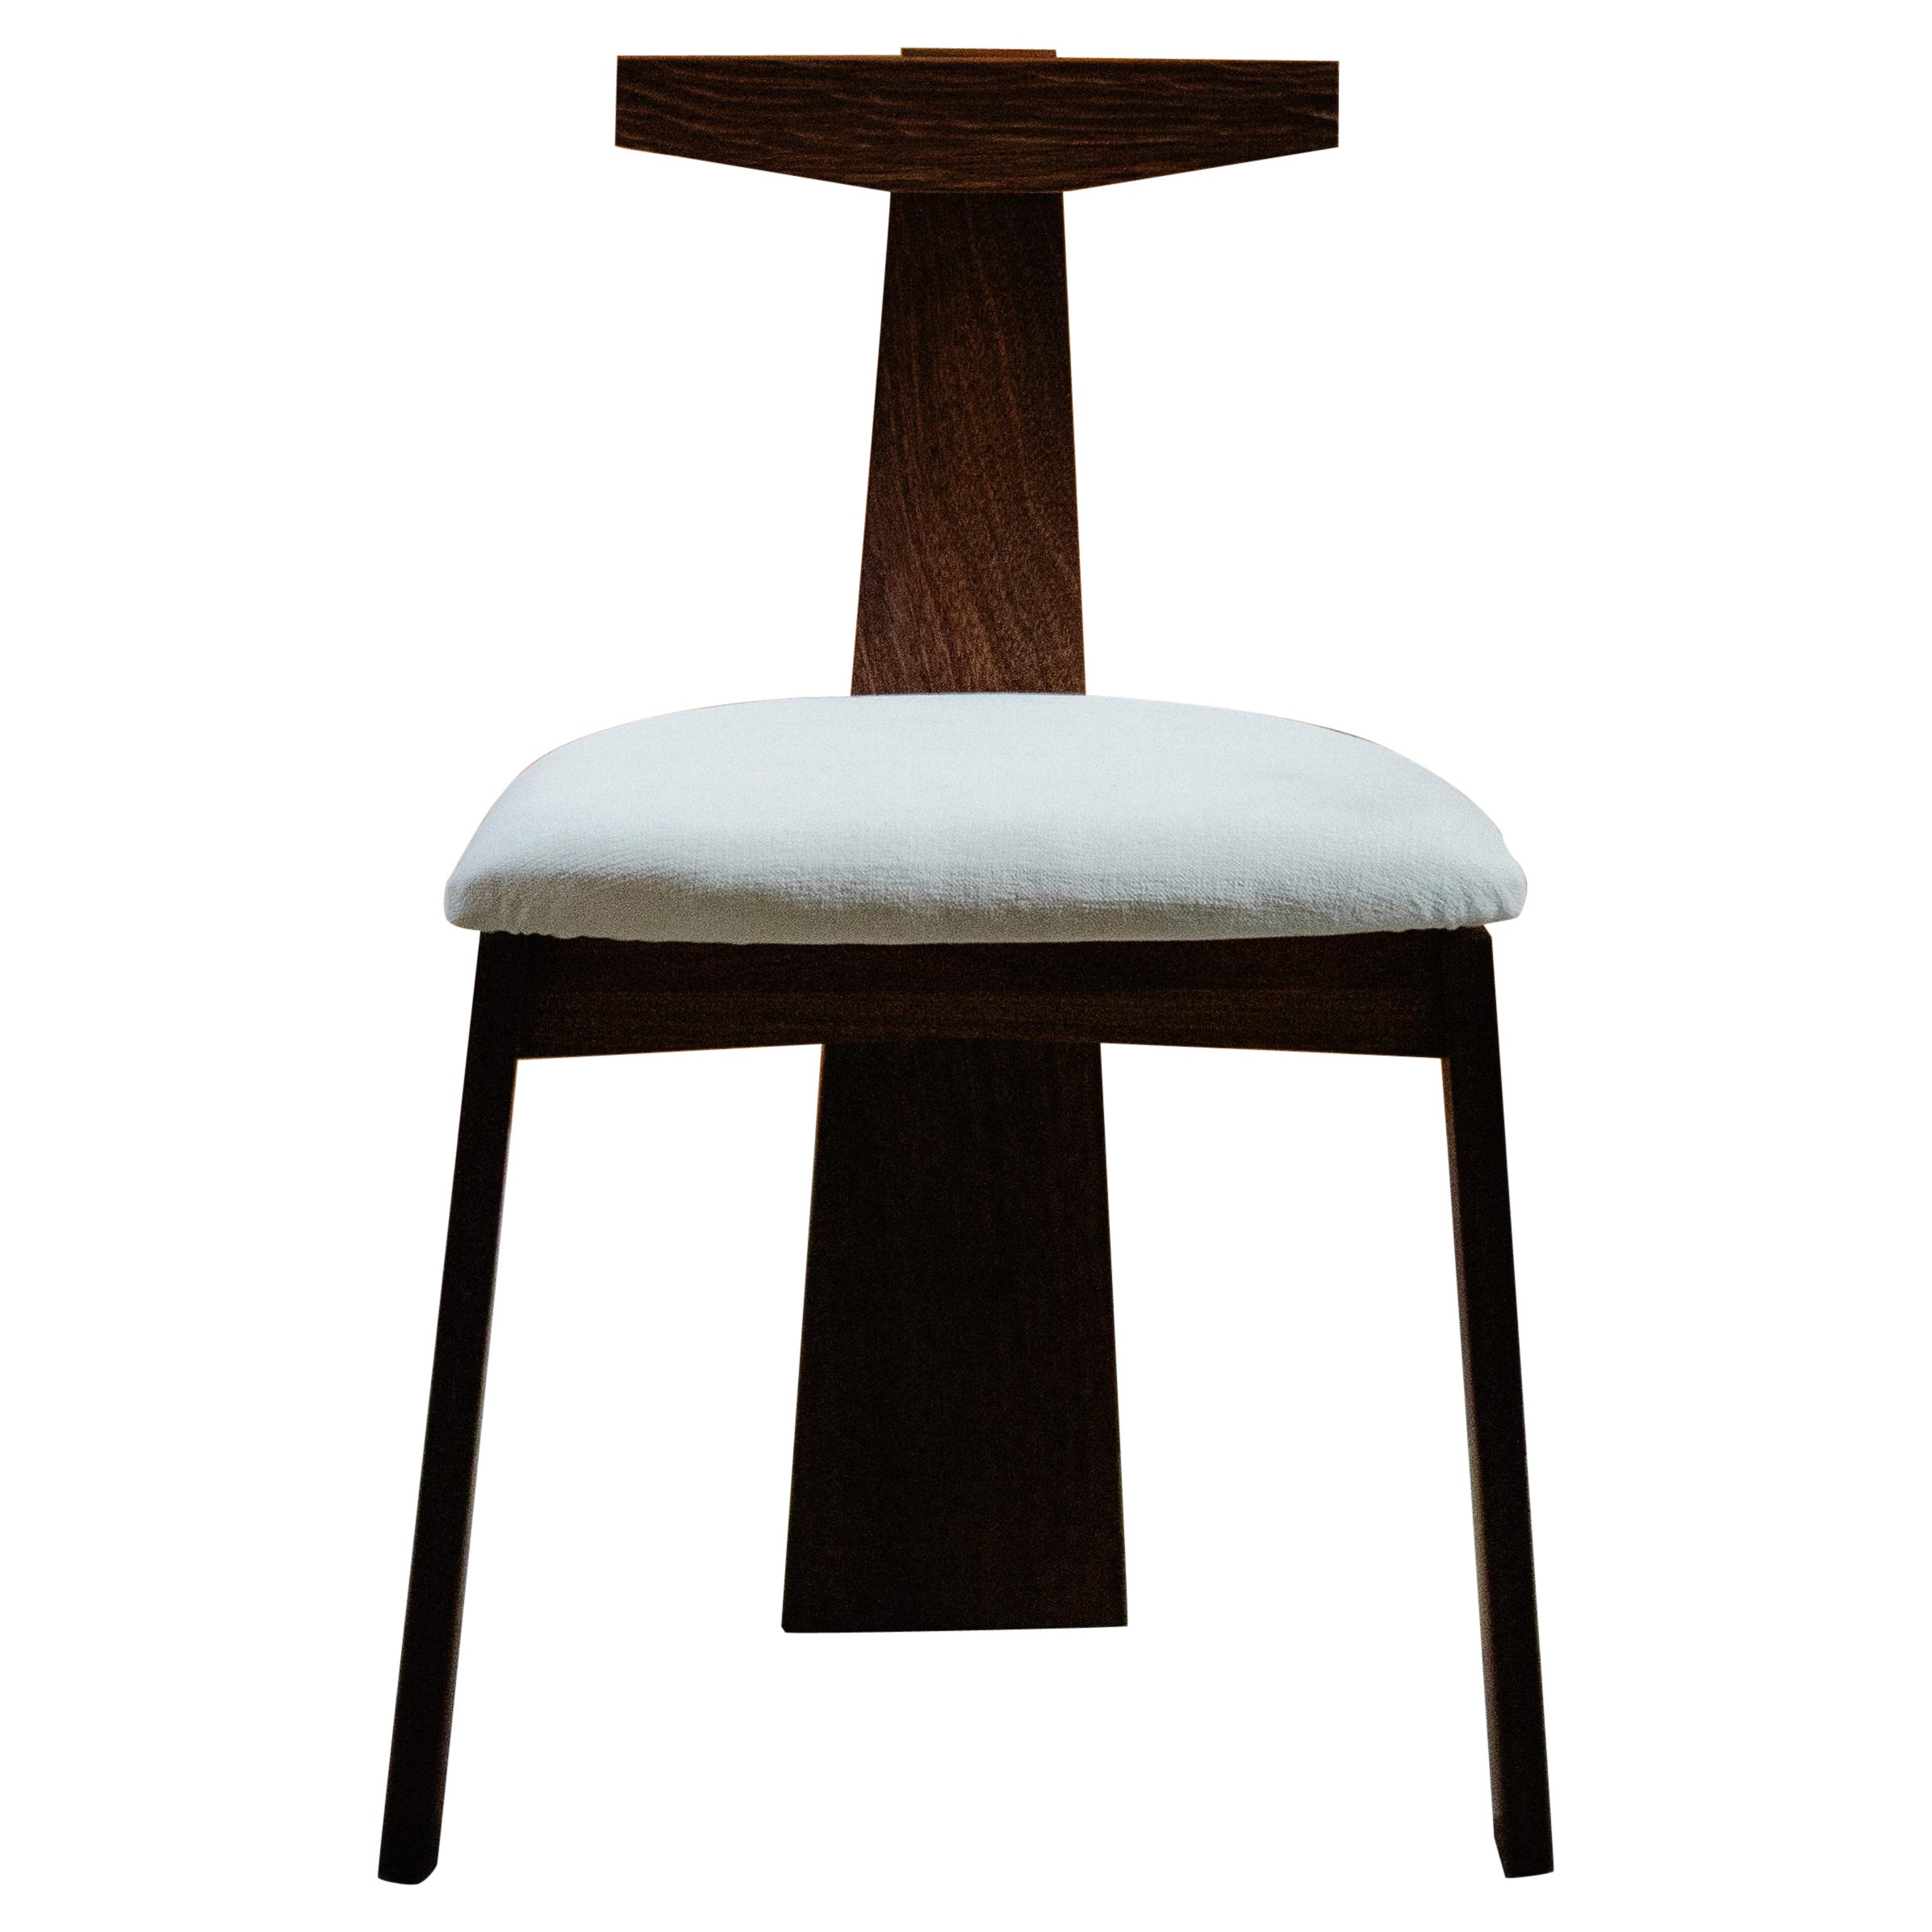 Urithi Dining Chair by Albert Potgieter Designs